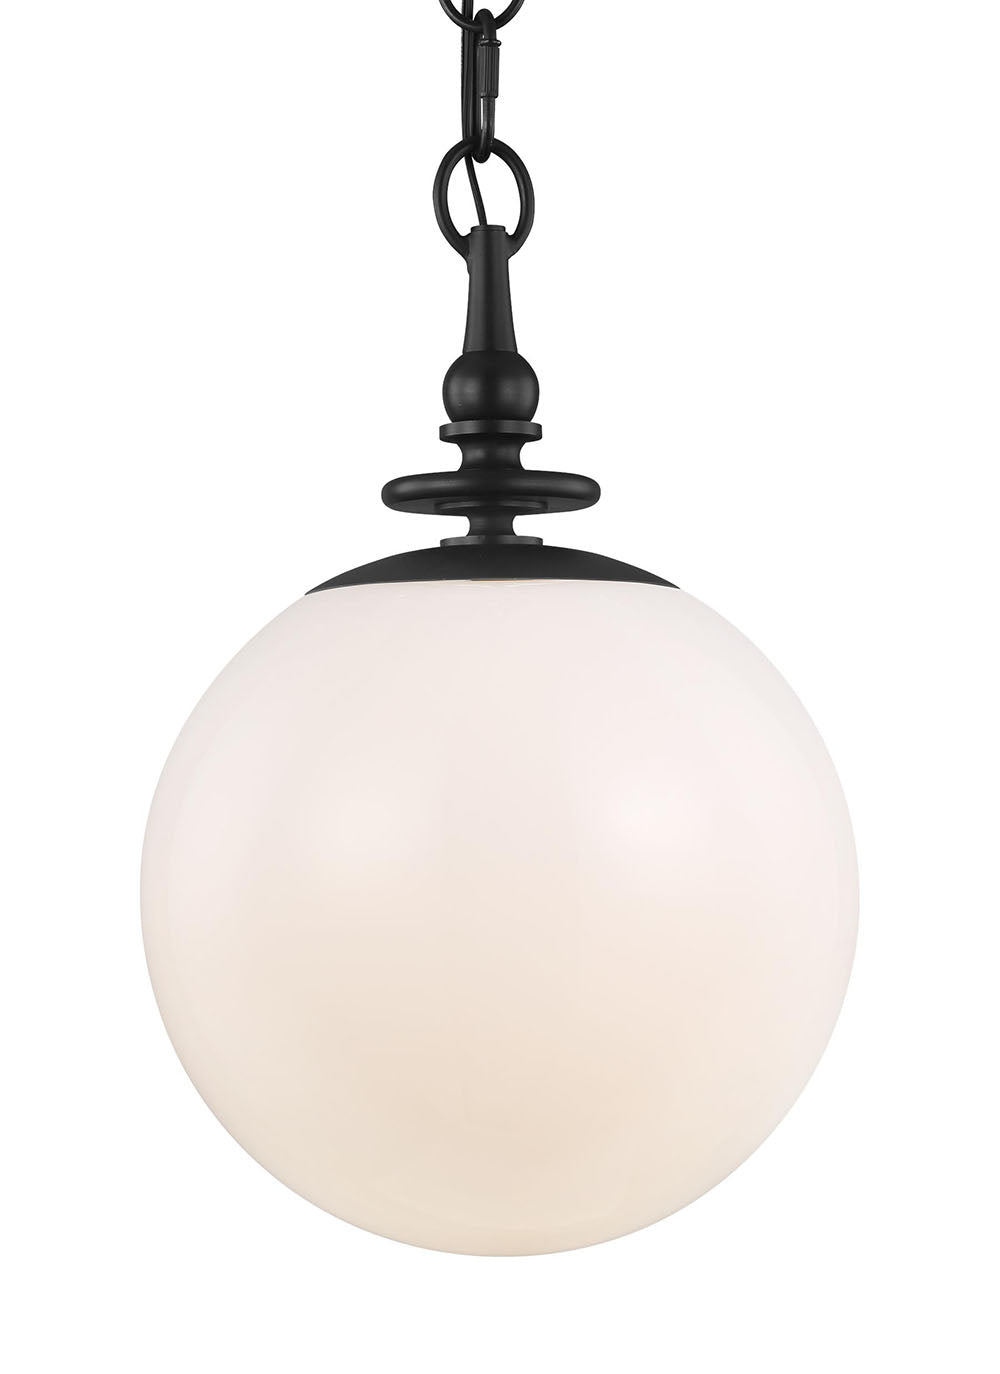 Dining room pendant with a white glass globe and aged iron finish.